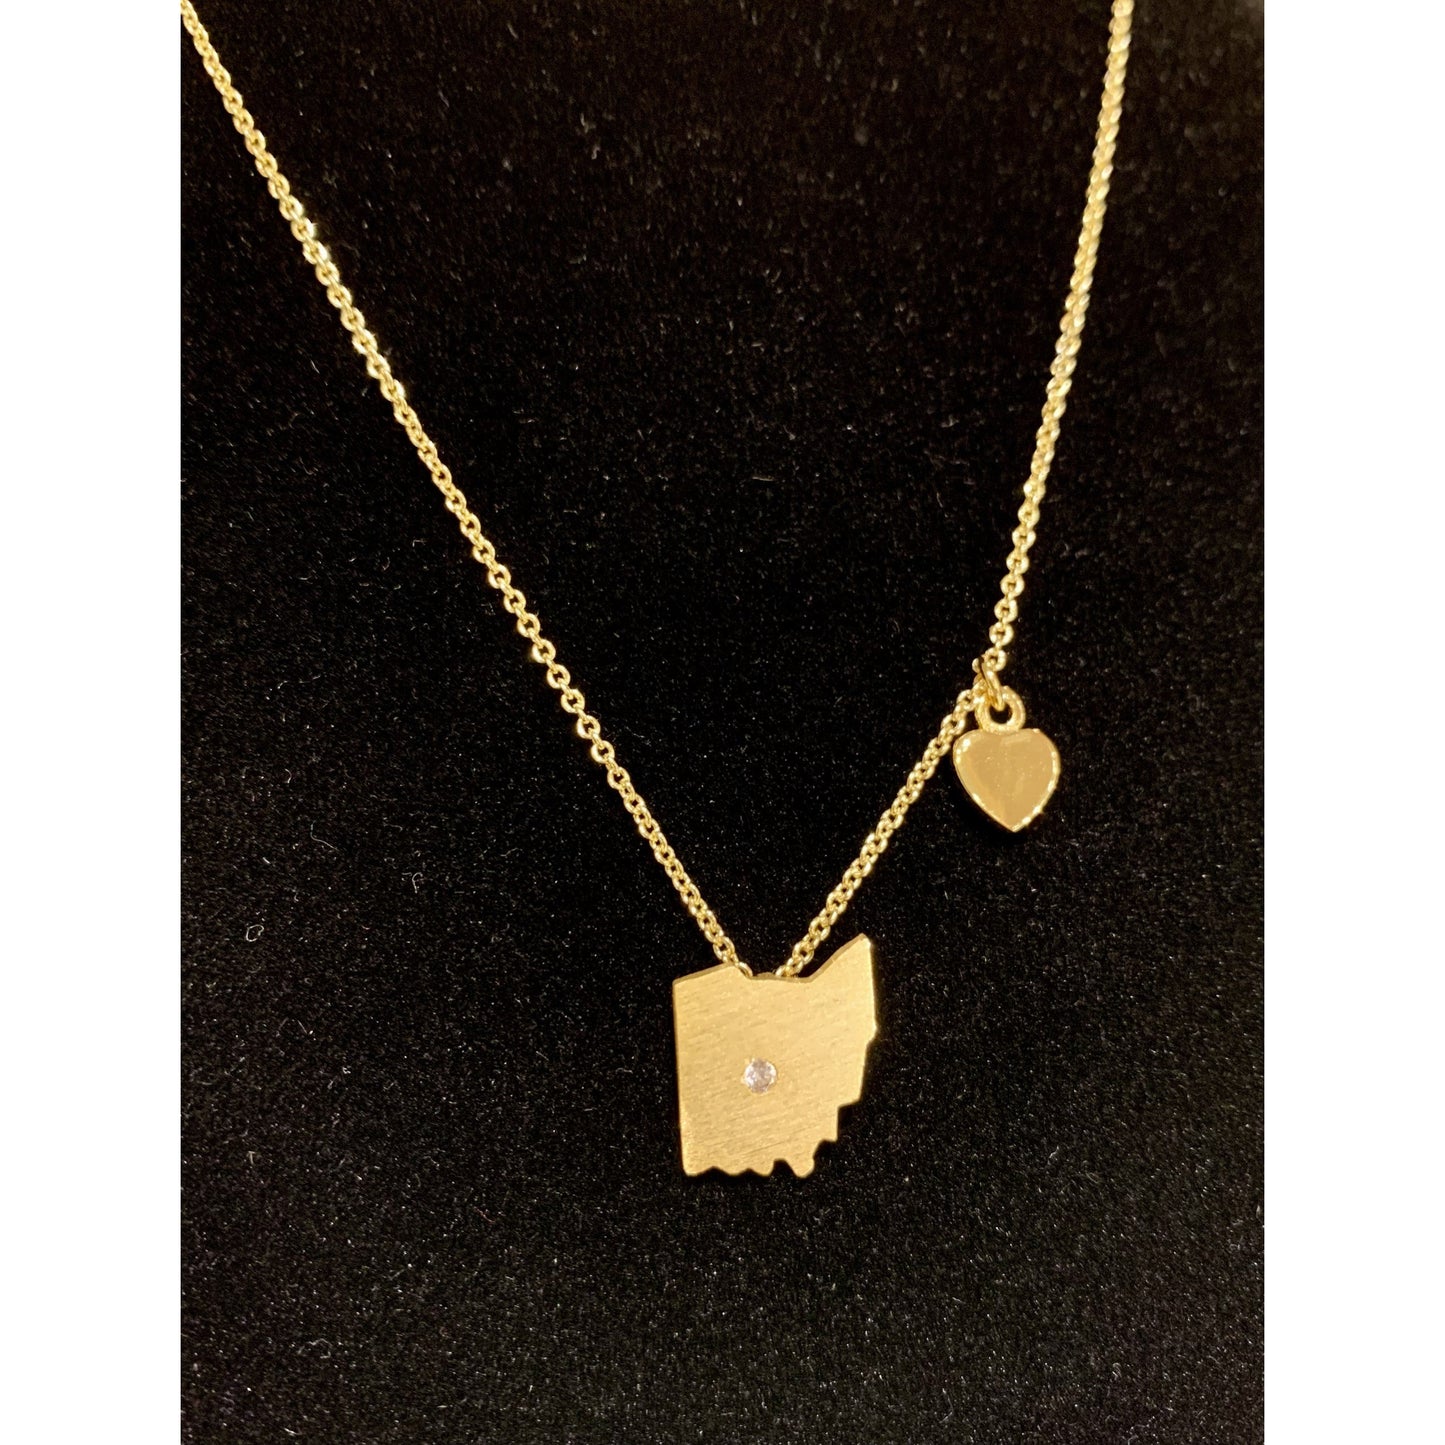 Gold Ohio with Heart Necklace